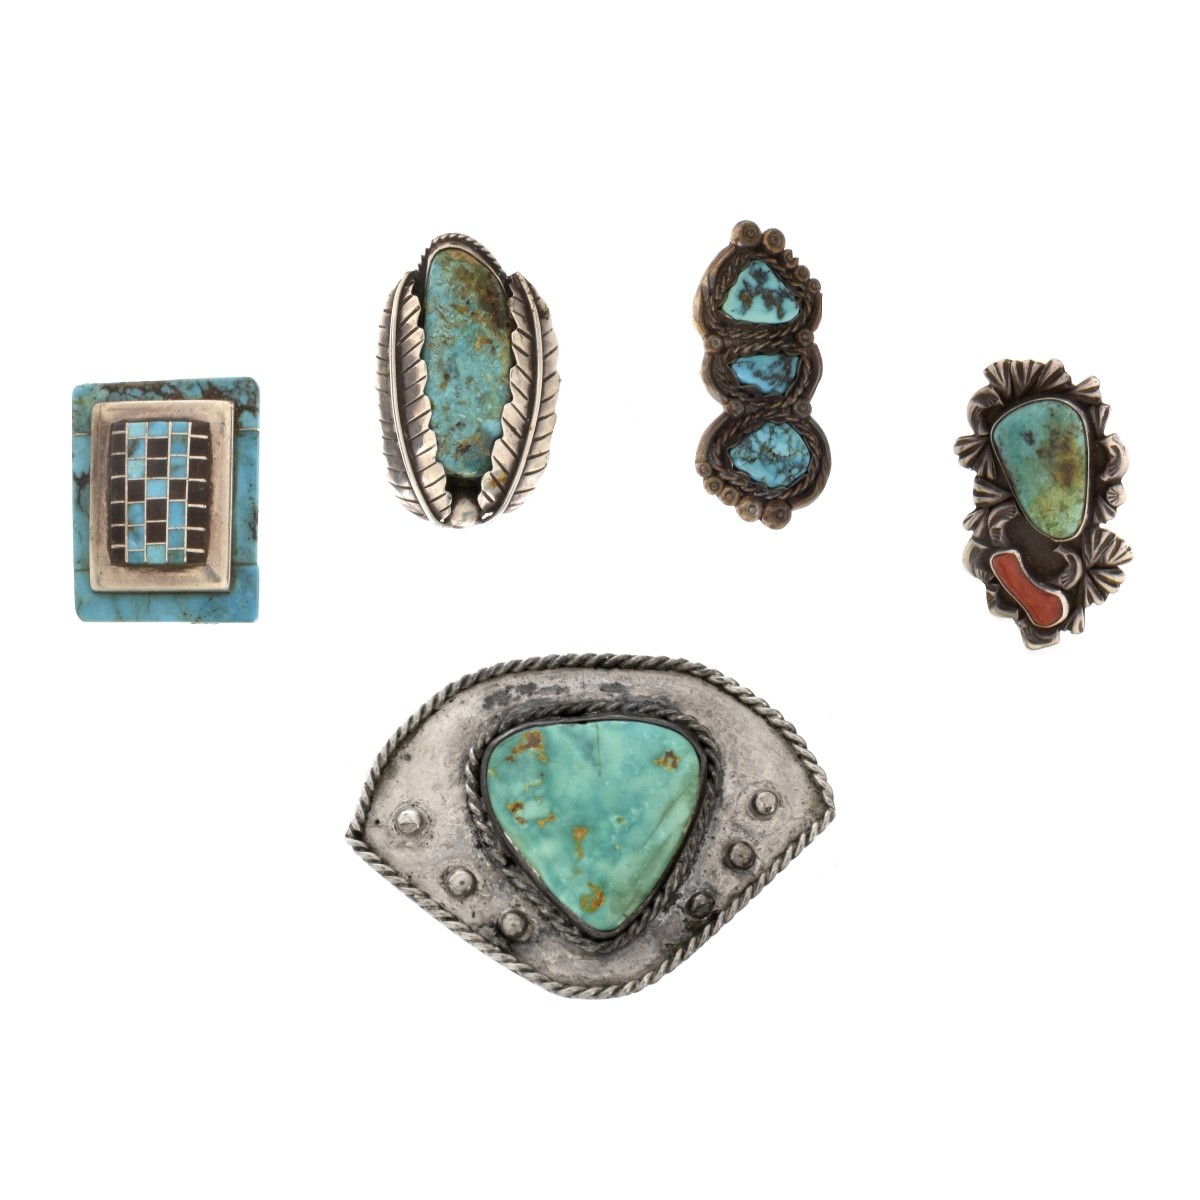 Five Piece Turquoise and Silver Jewelry